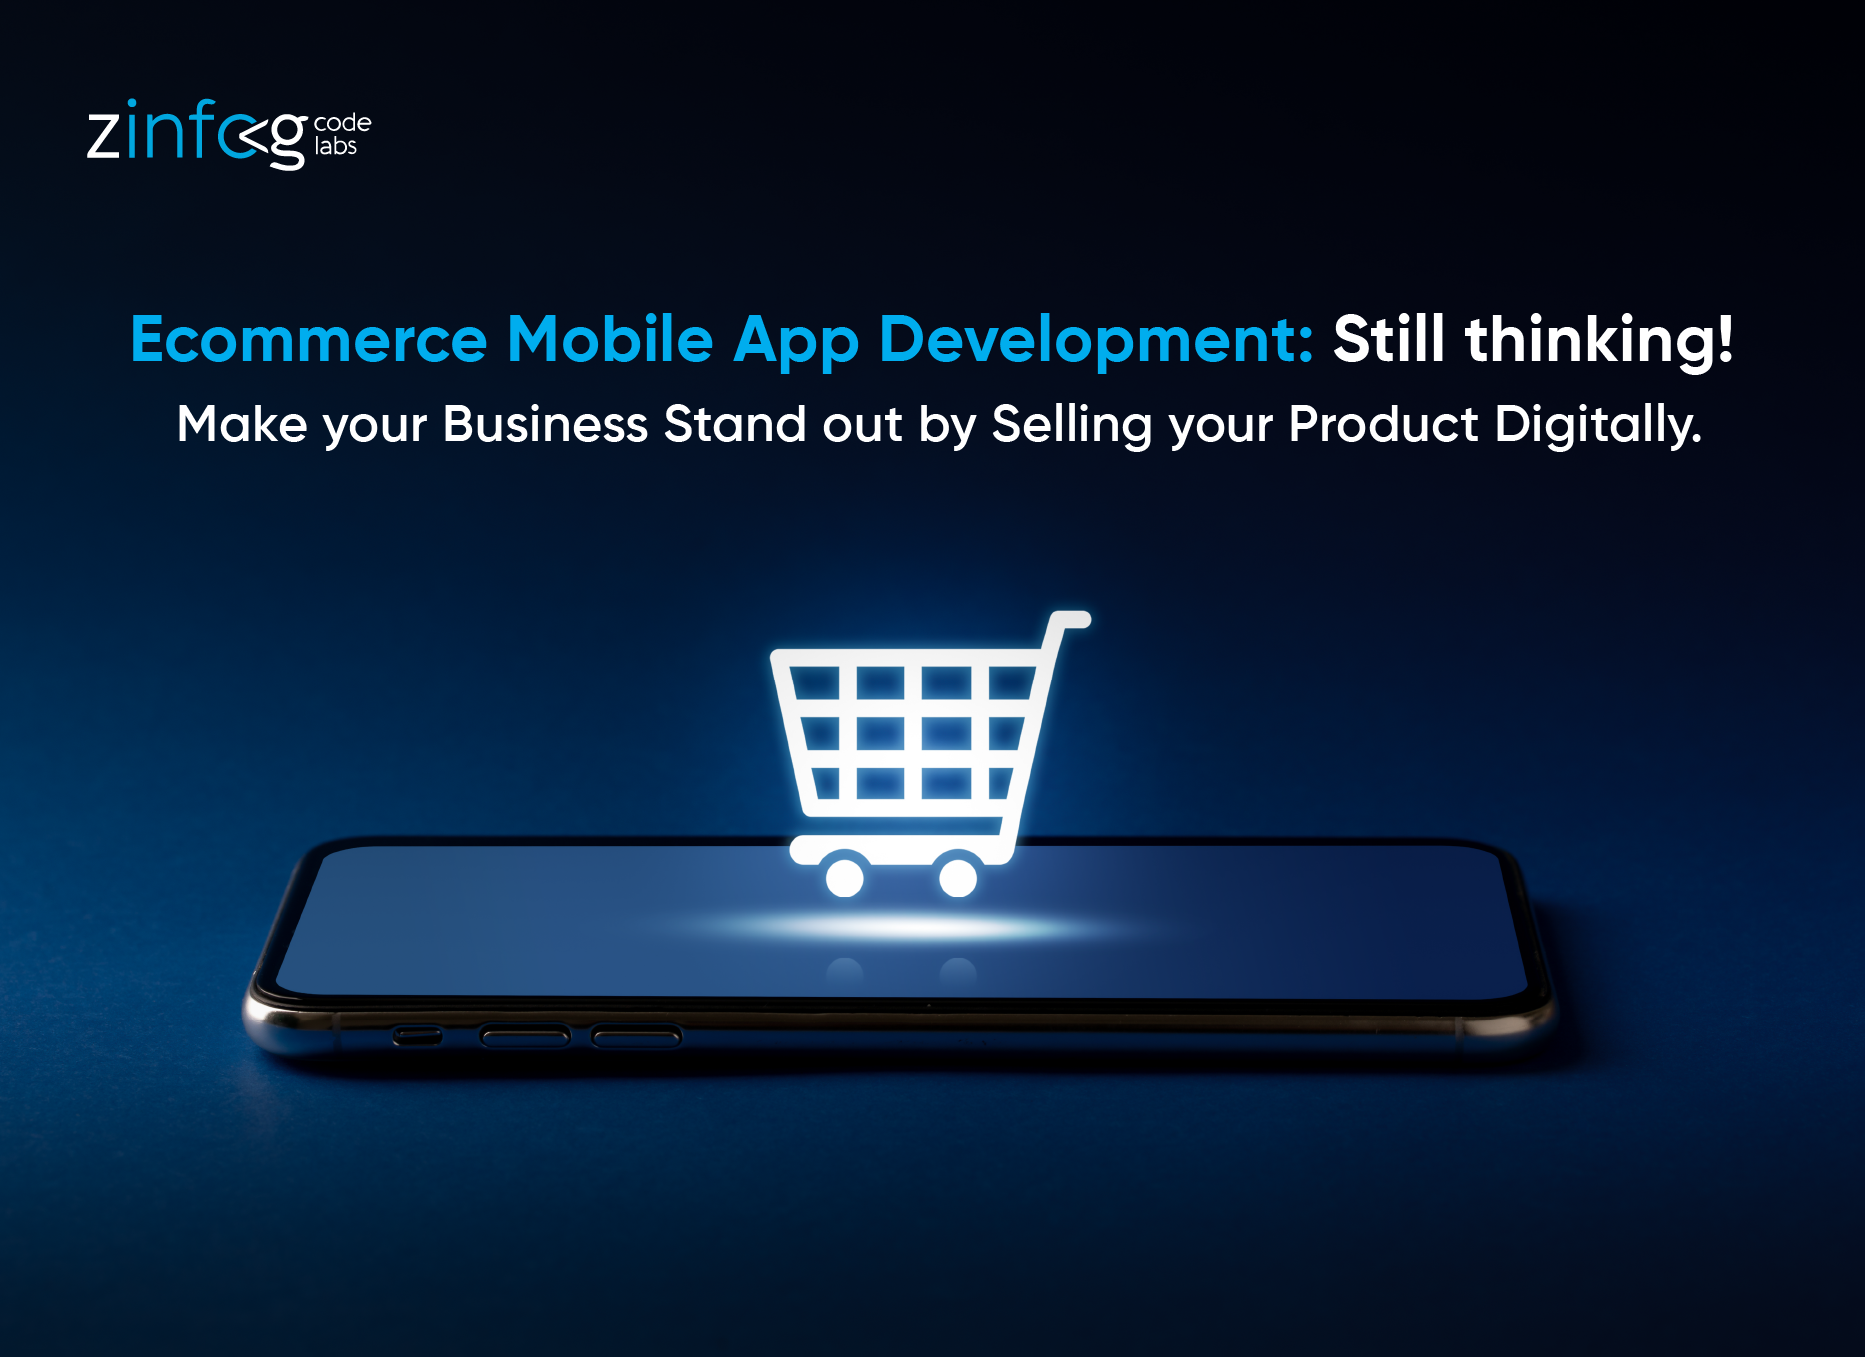 ecommerce-mobile-app-development-still-thinking-make-your-business-stand-out-by-selling-digitally.html